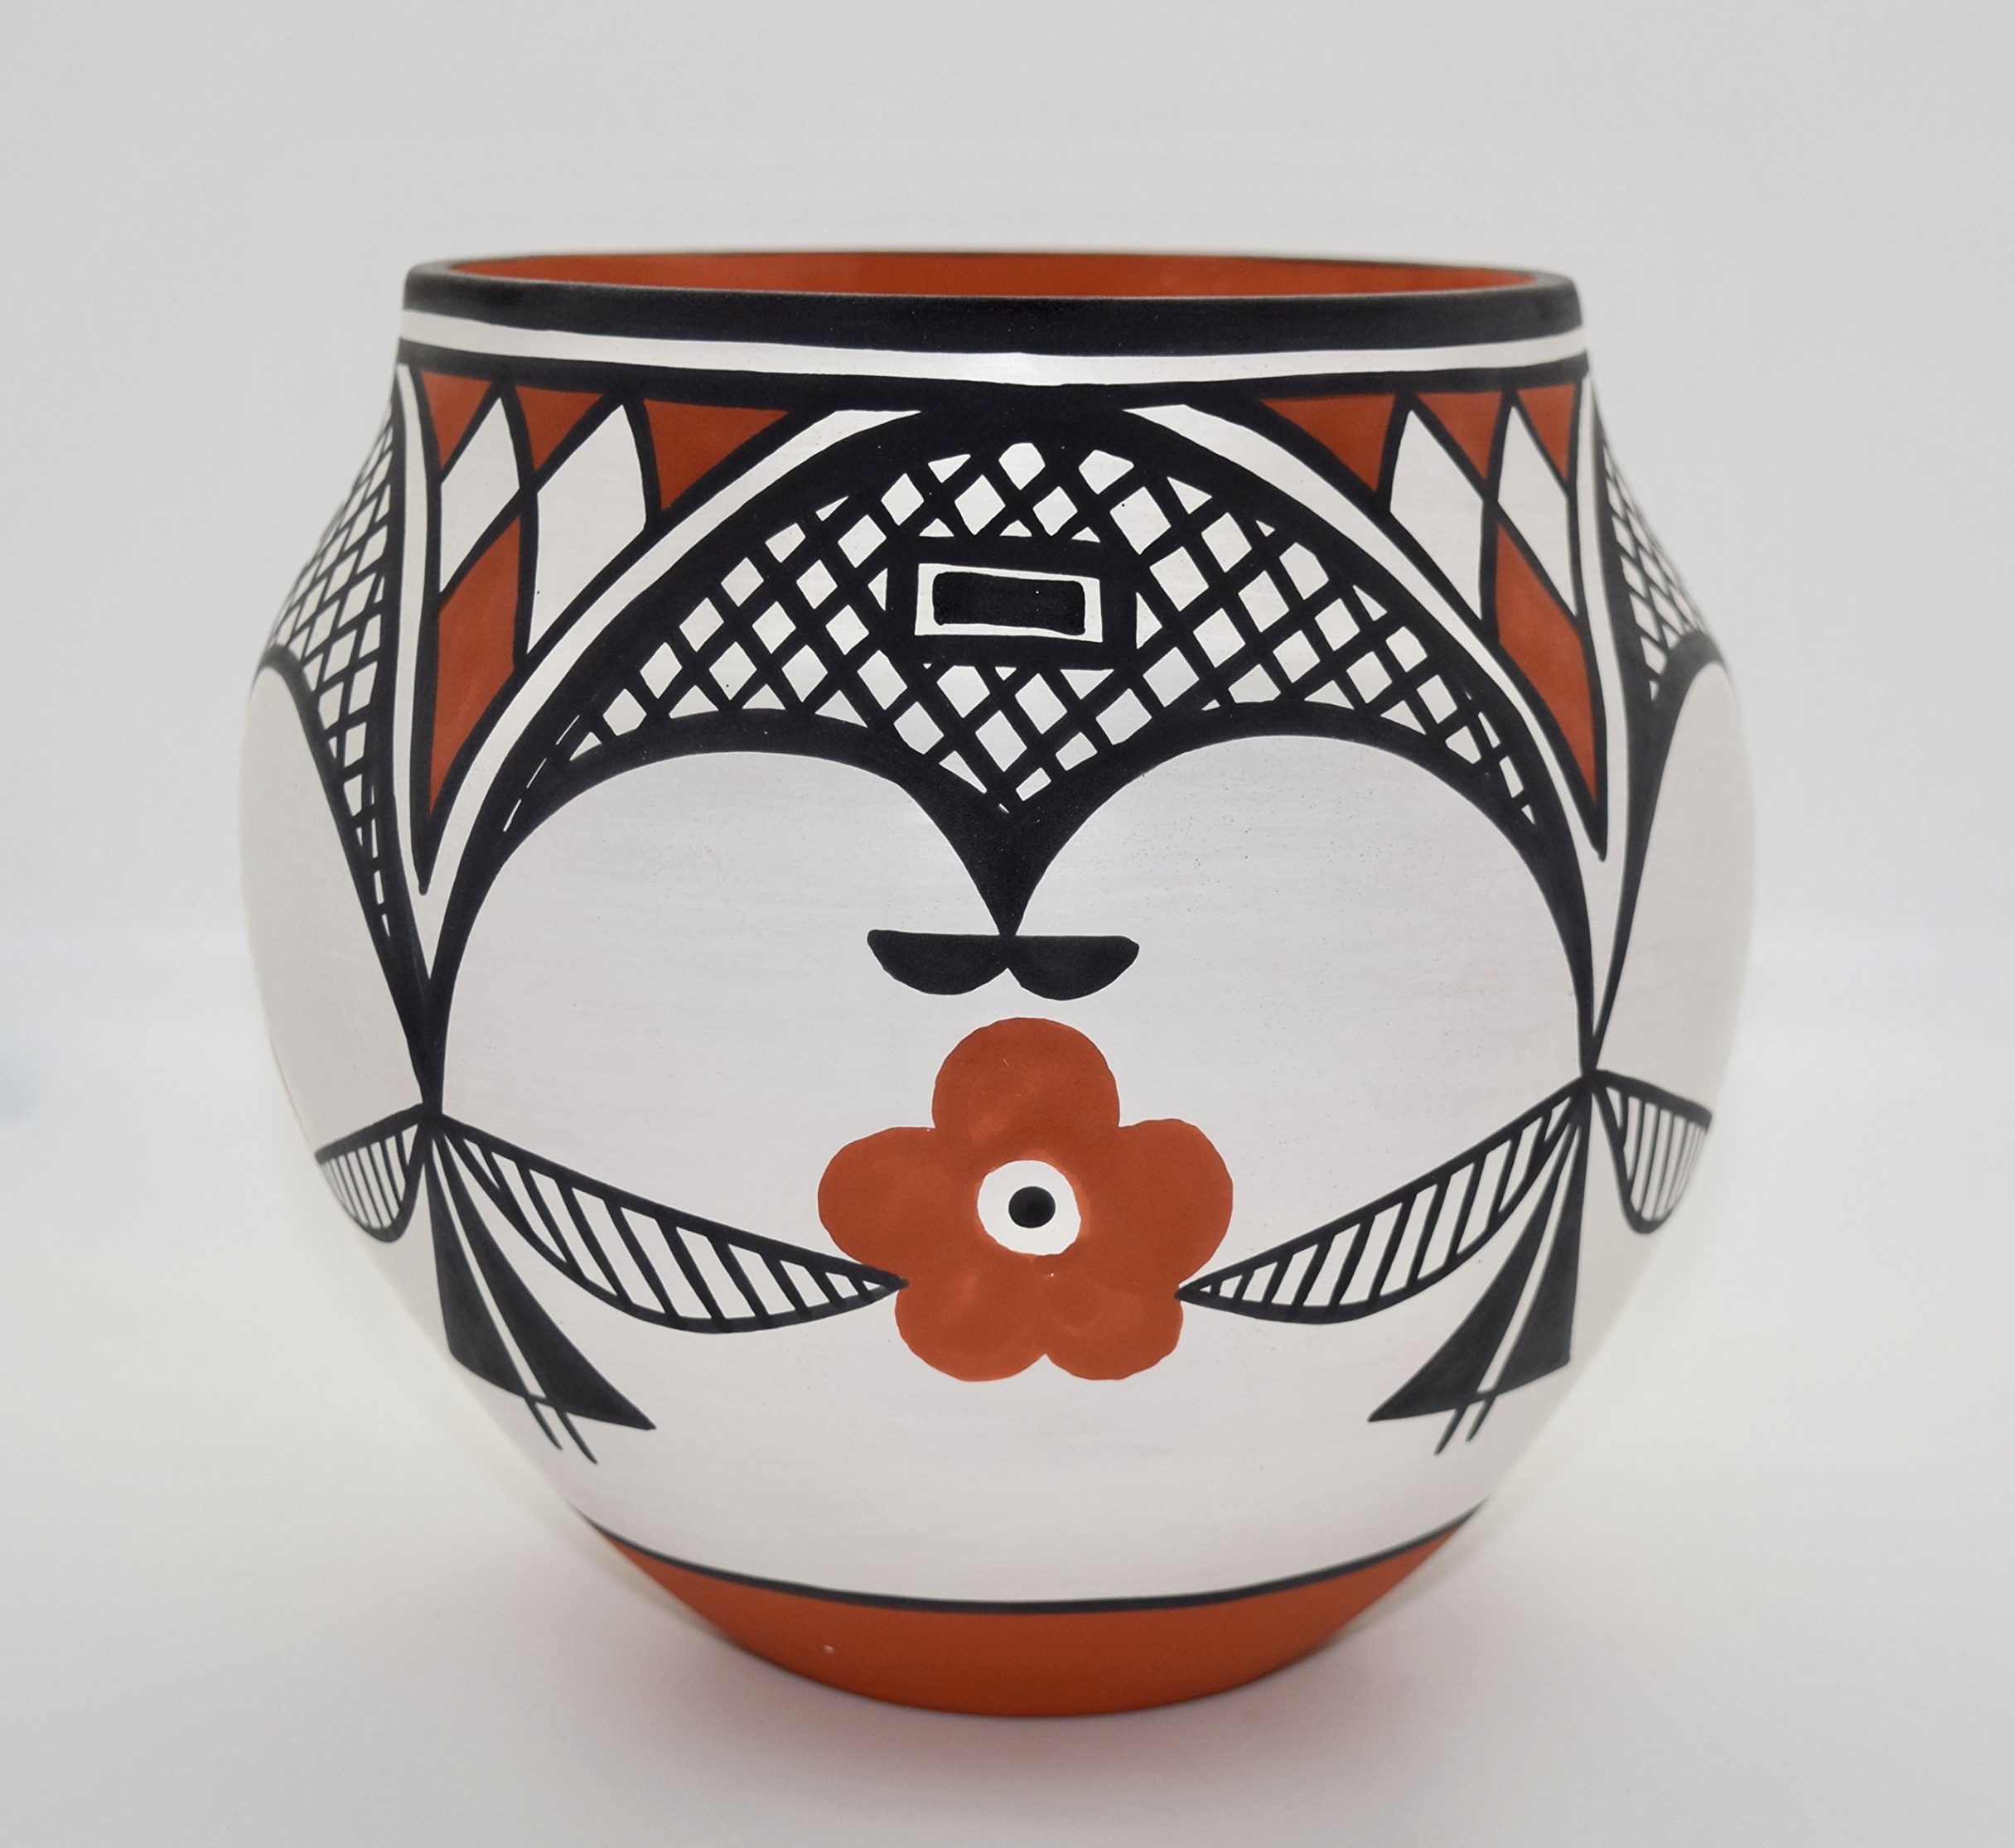 acoma pottery designs Bulan 5 Traditional Hand Coiled Acoma Pueblo Pottery Bowl with Flower Design